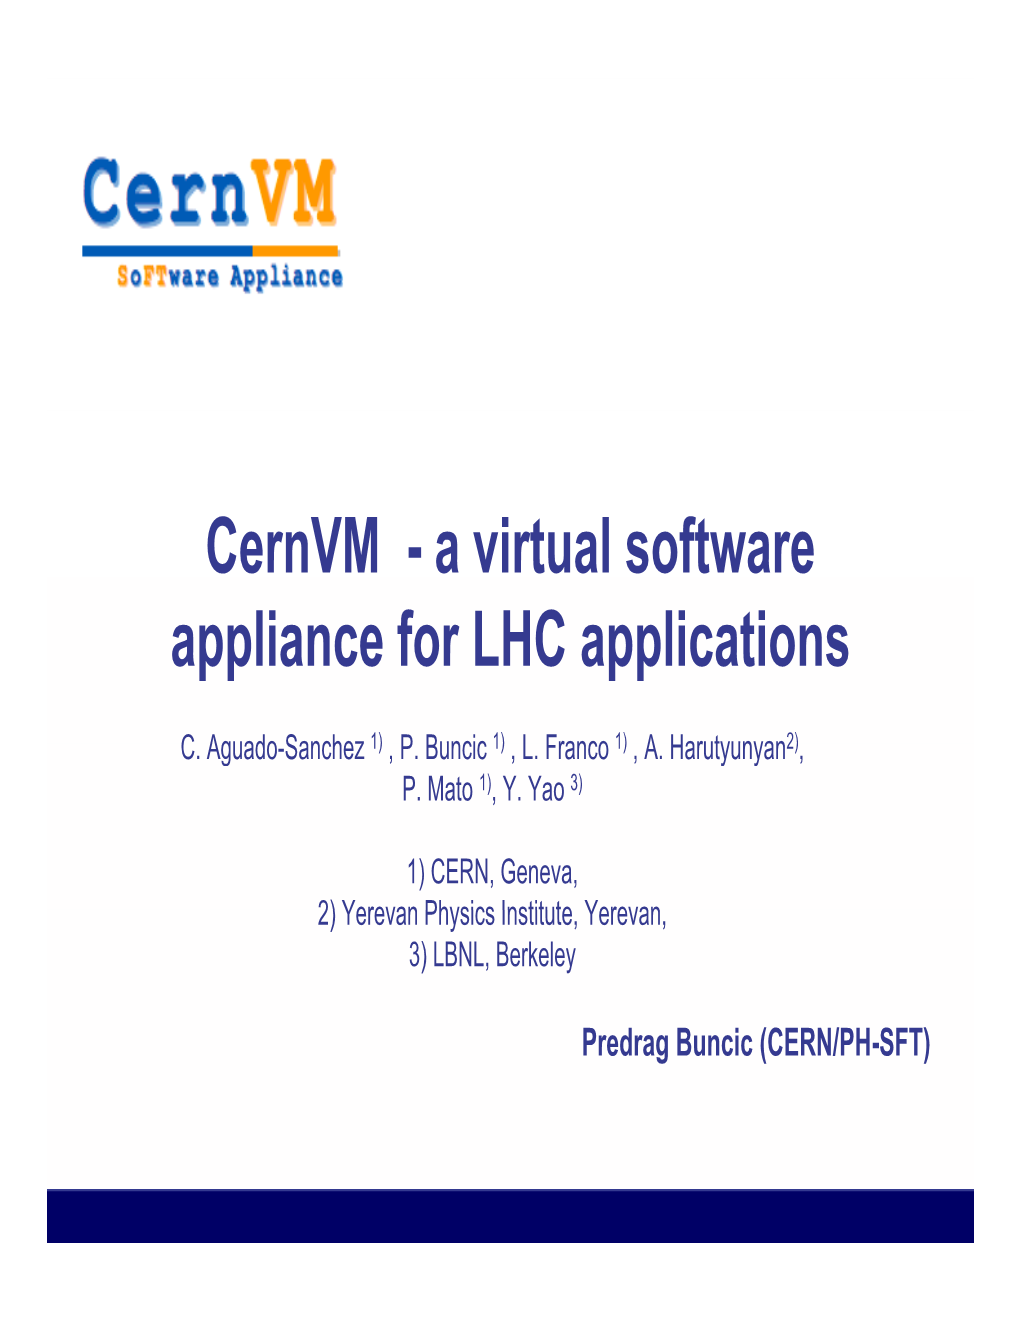 Cernvm - a Virtual Software Appliance for LHC Applications